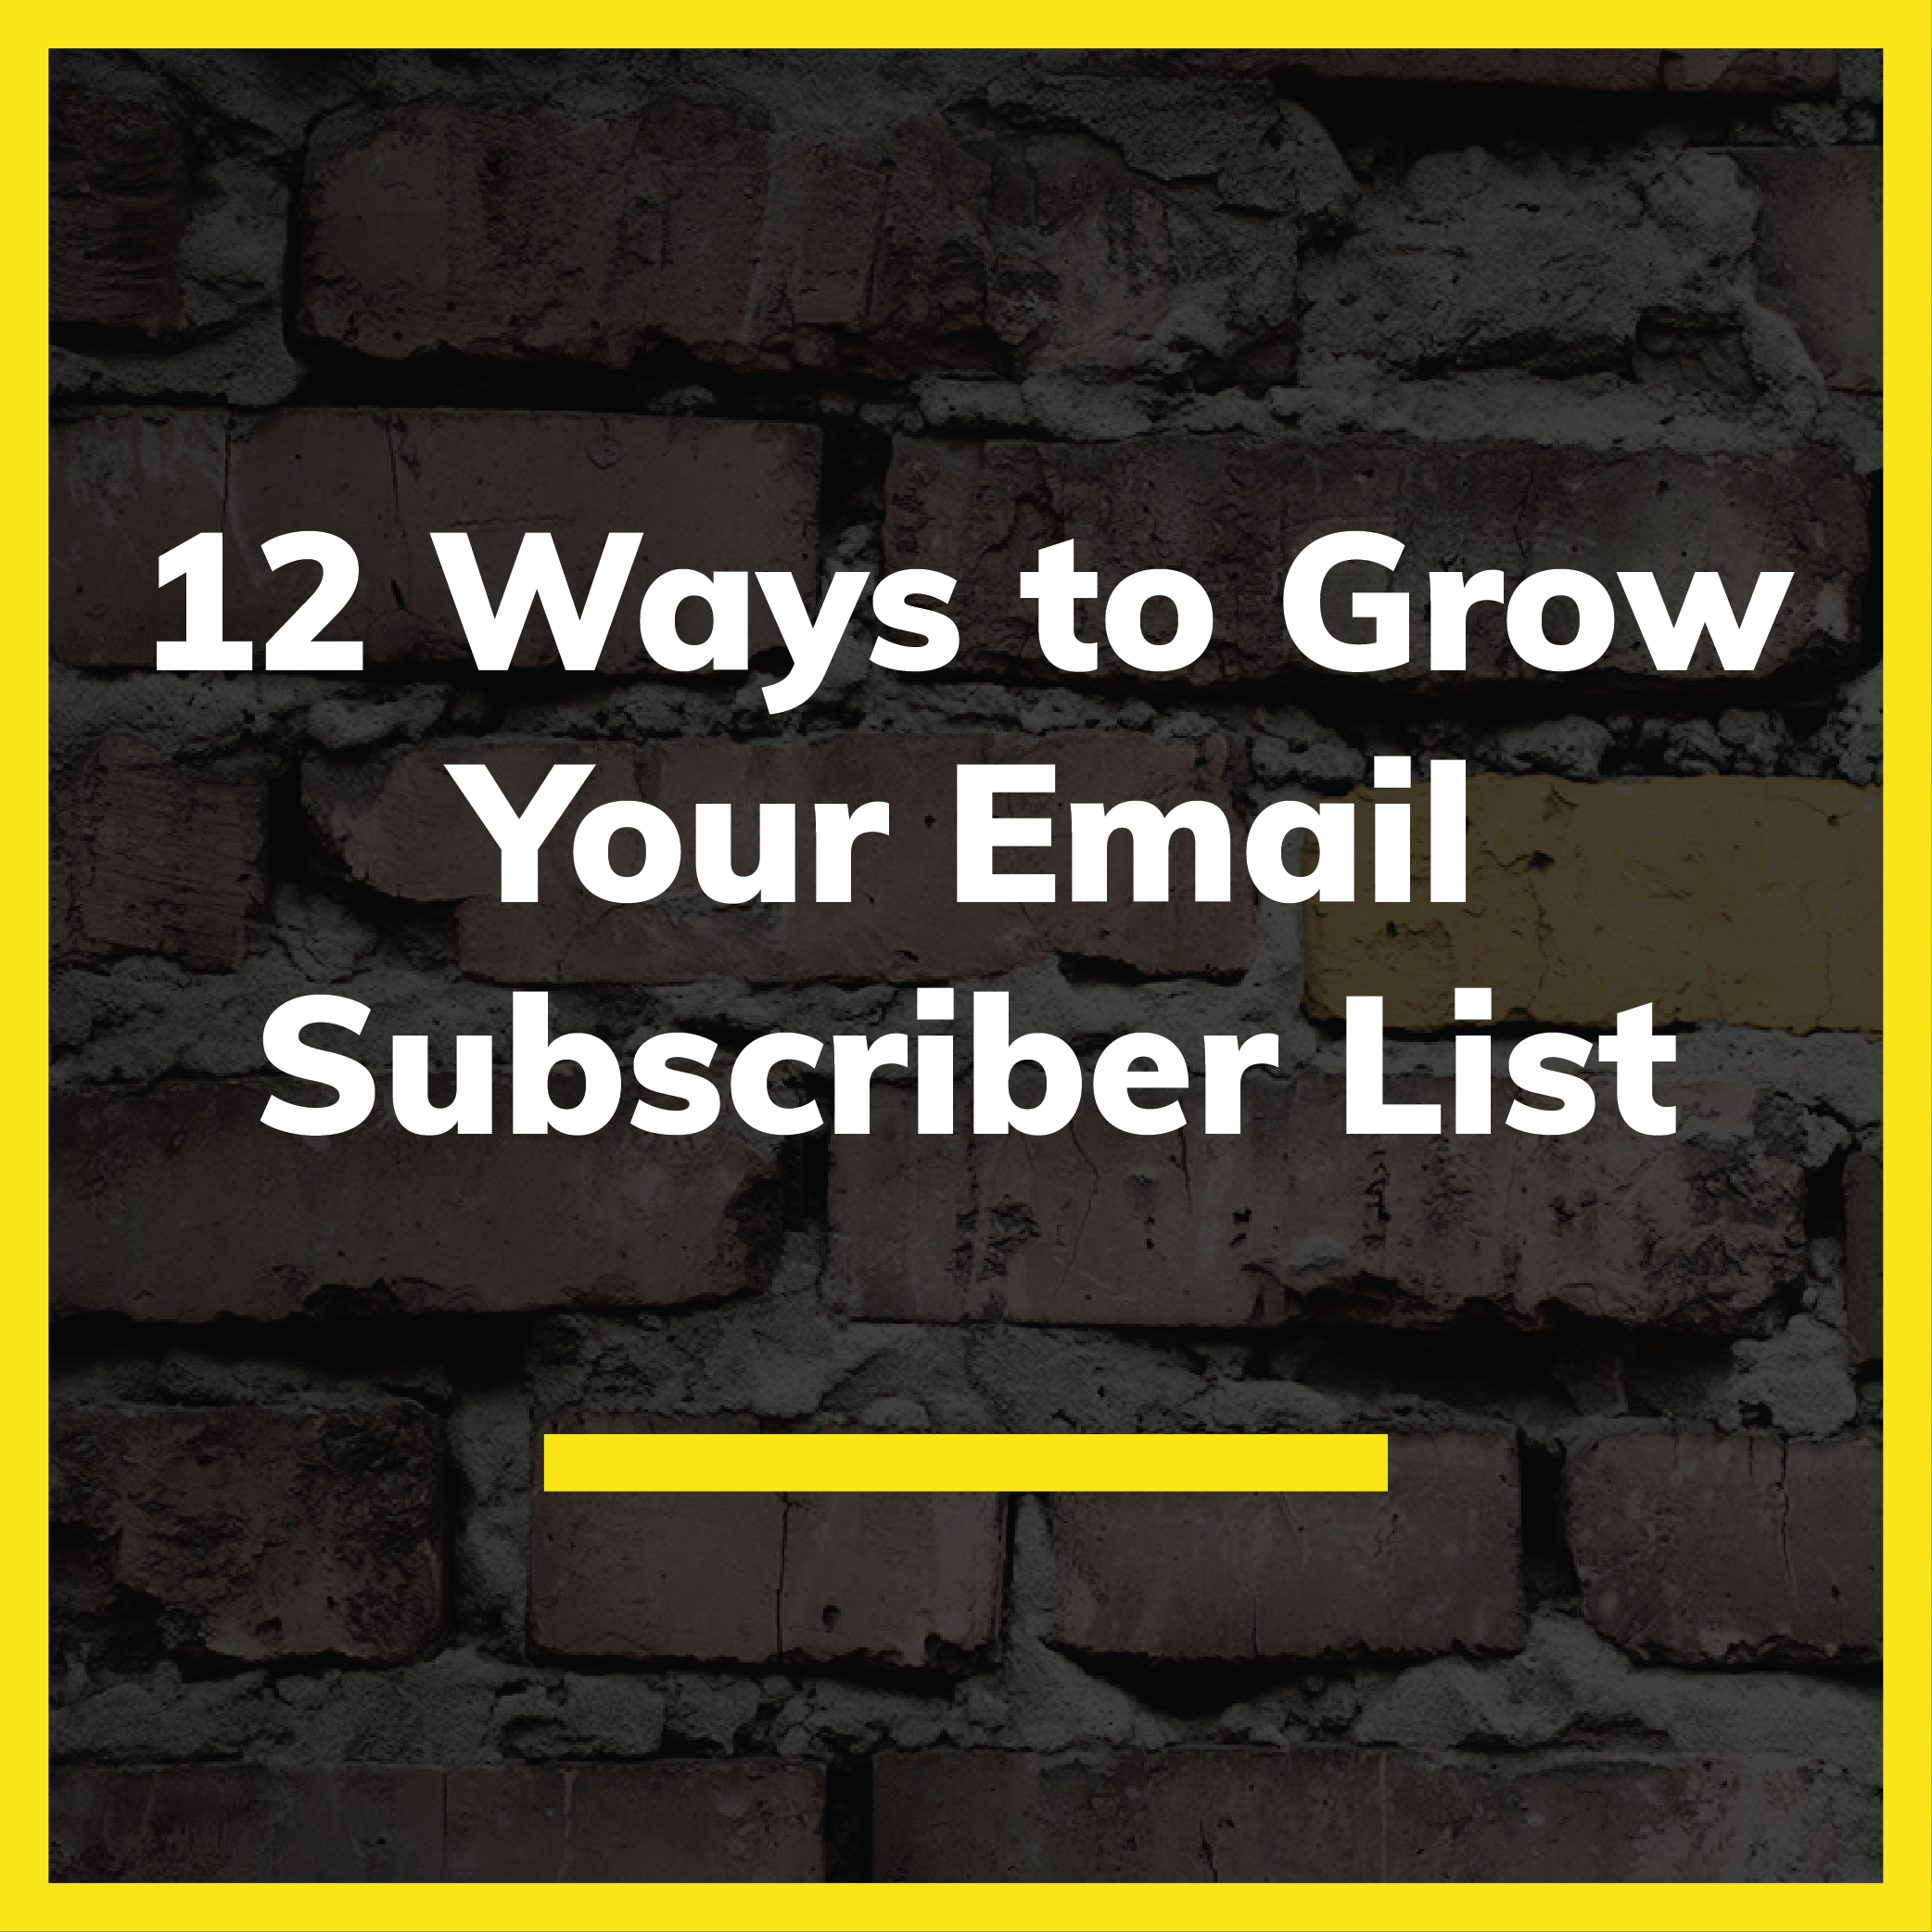 12 Ways to Grow Your Email Subscriber List